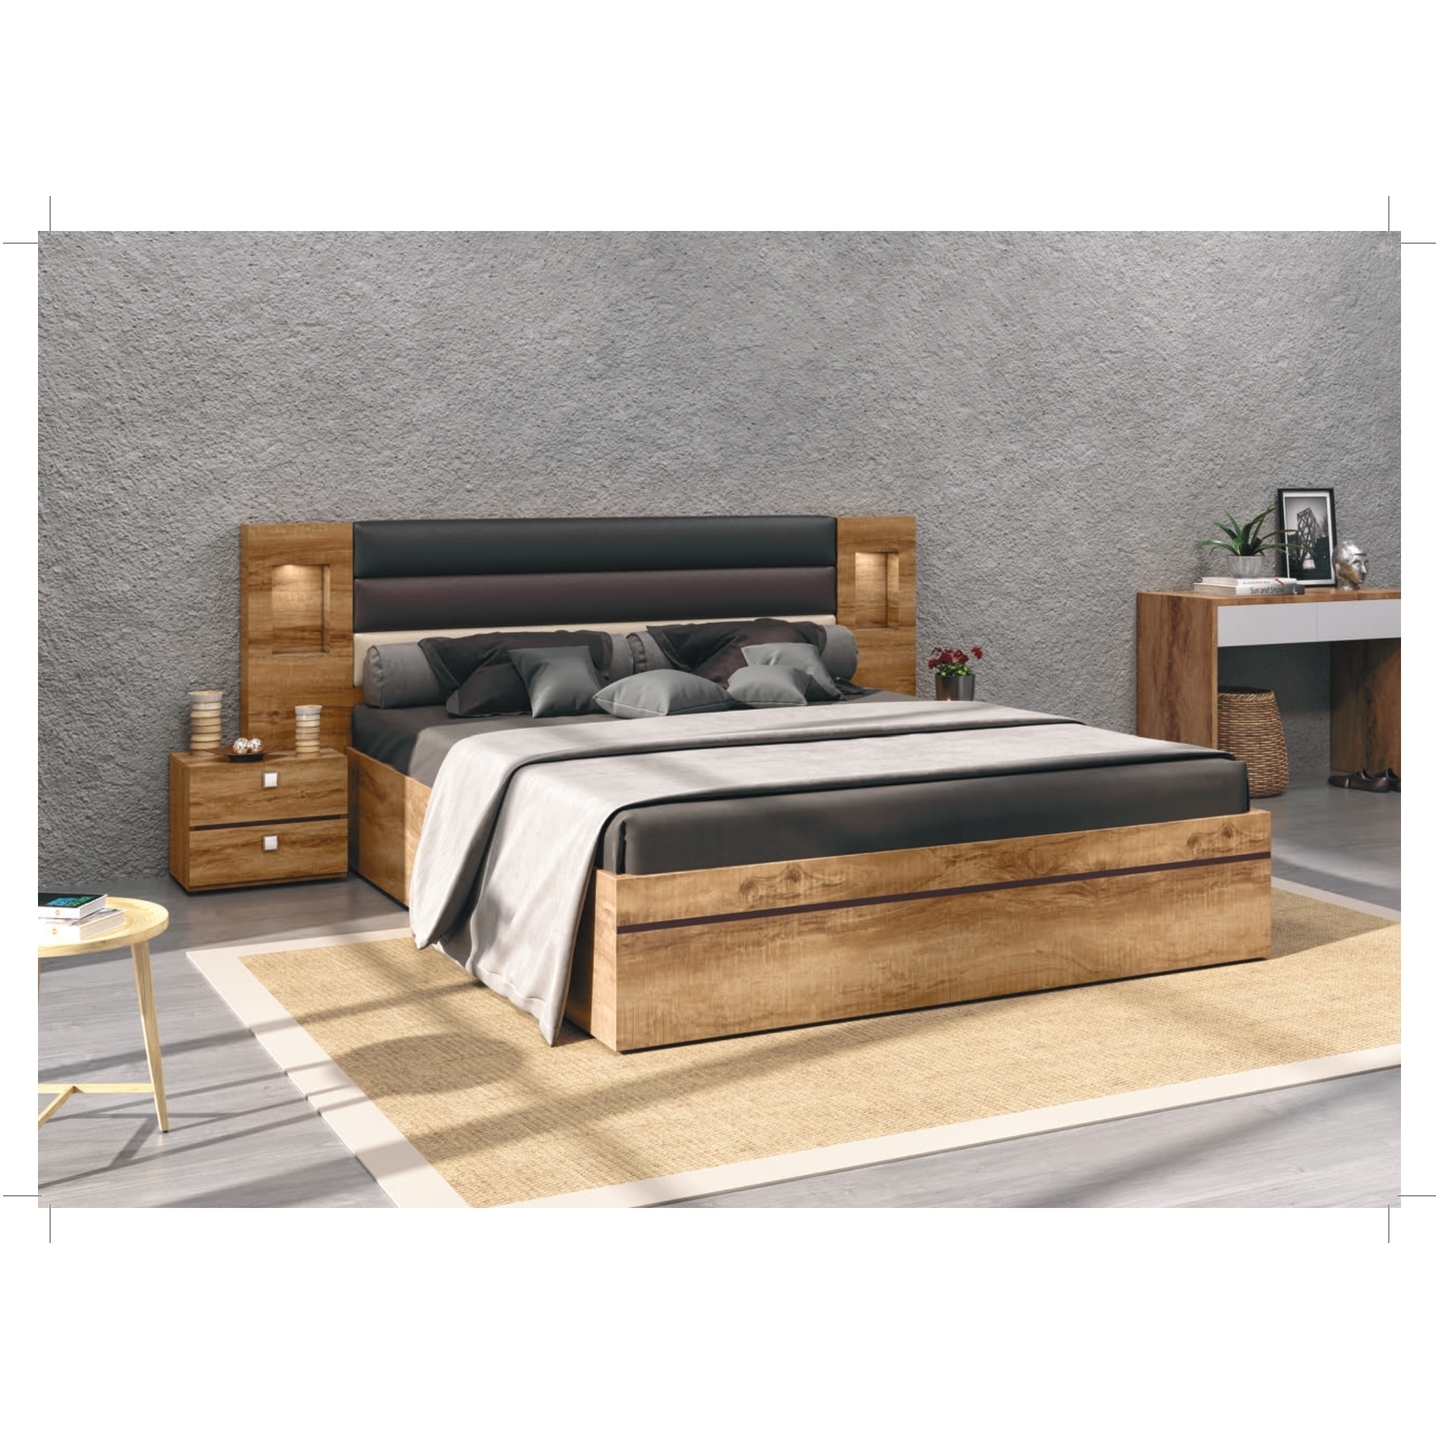 RLF Queen Size Bed 78"x60" Venus Bed With Side Box In Brown Colour